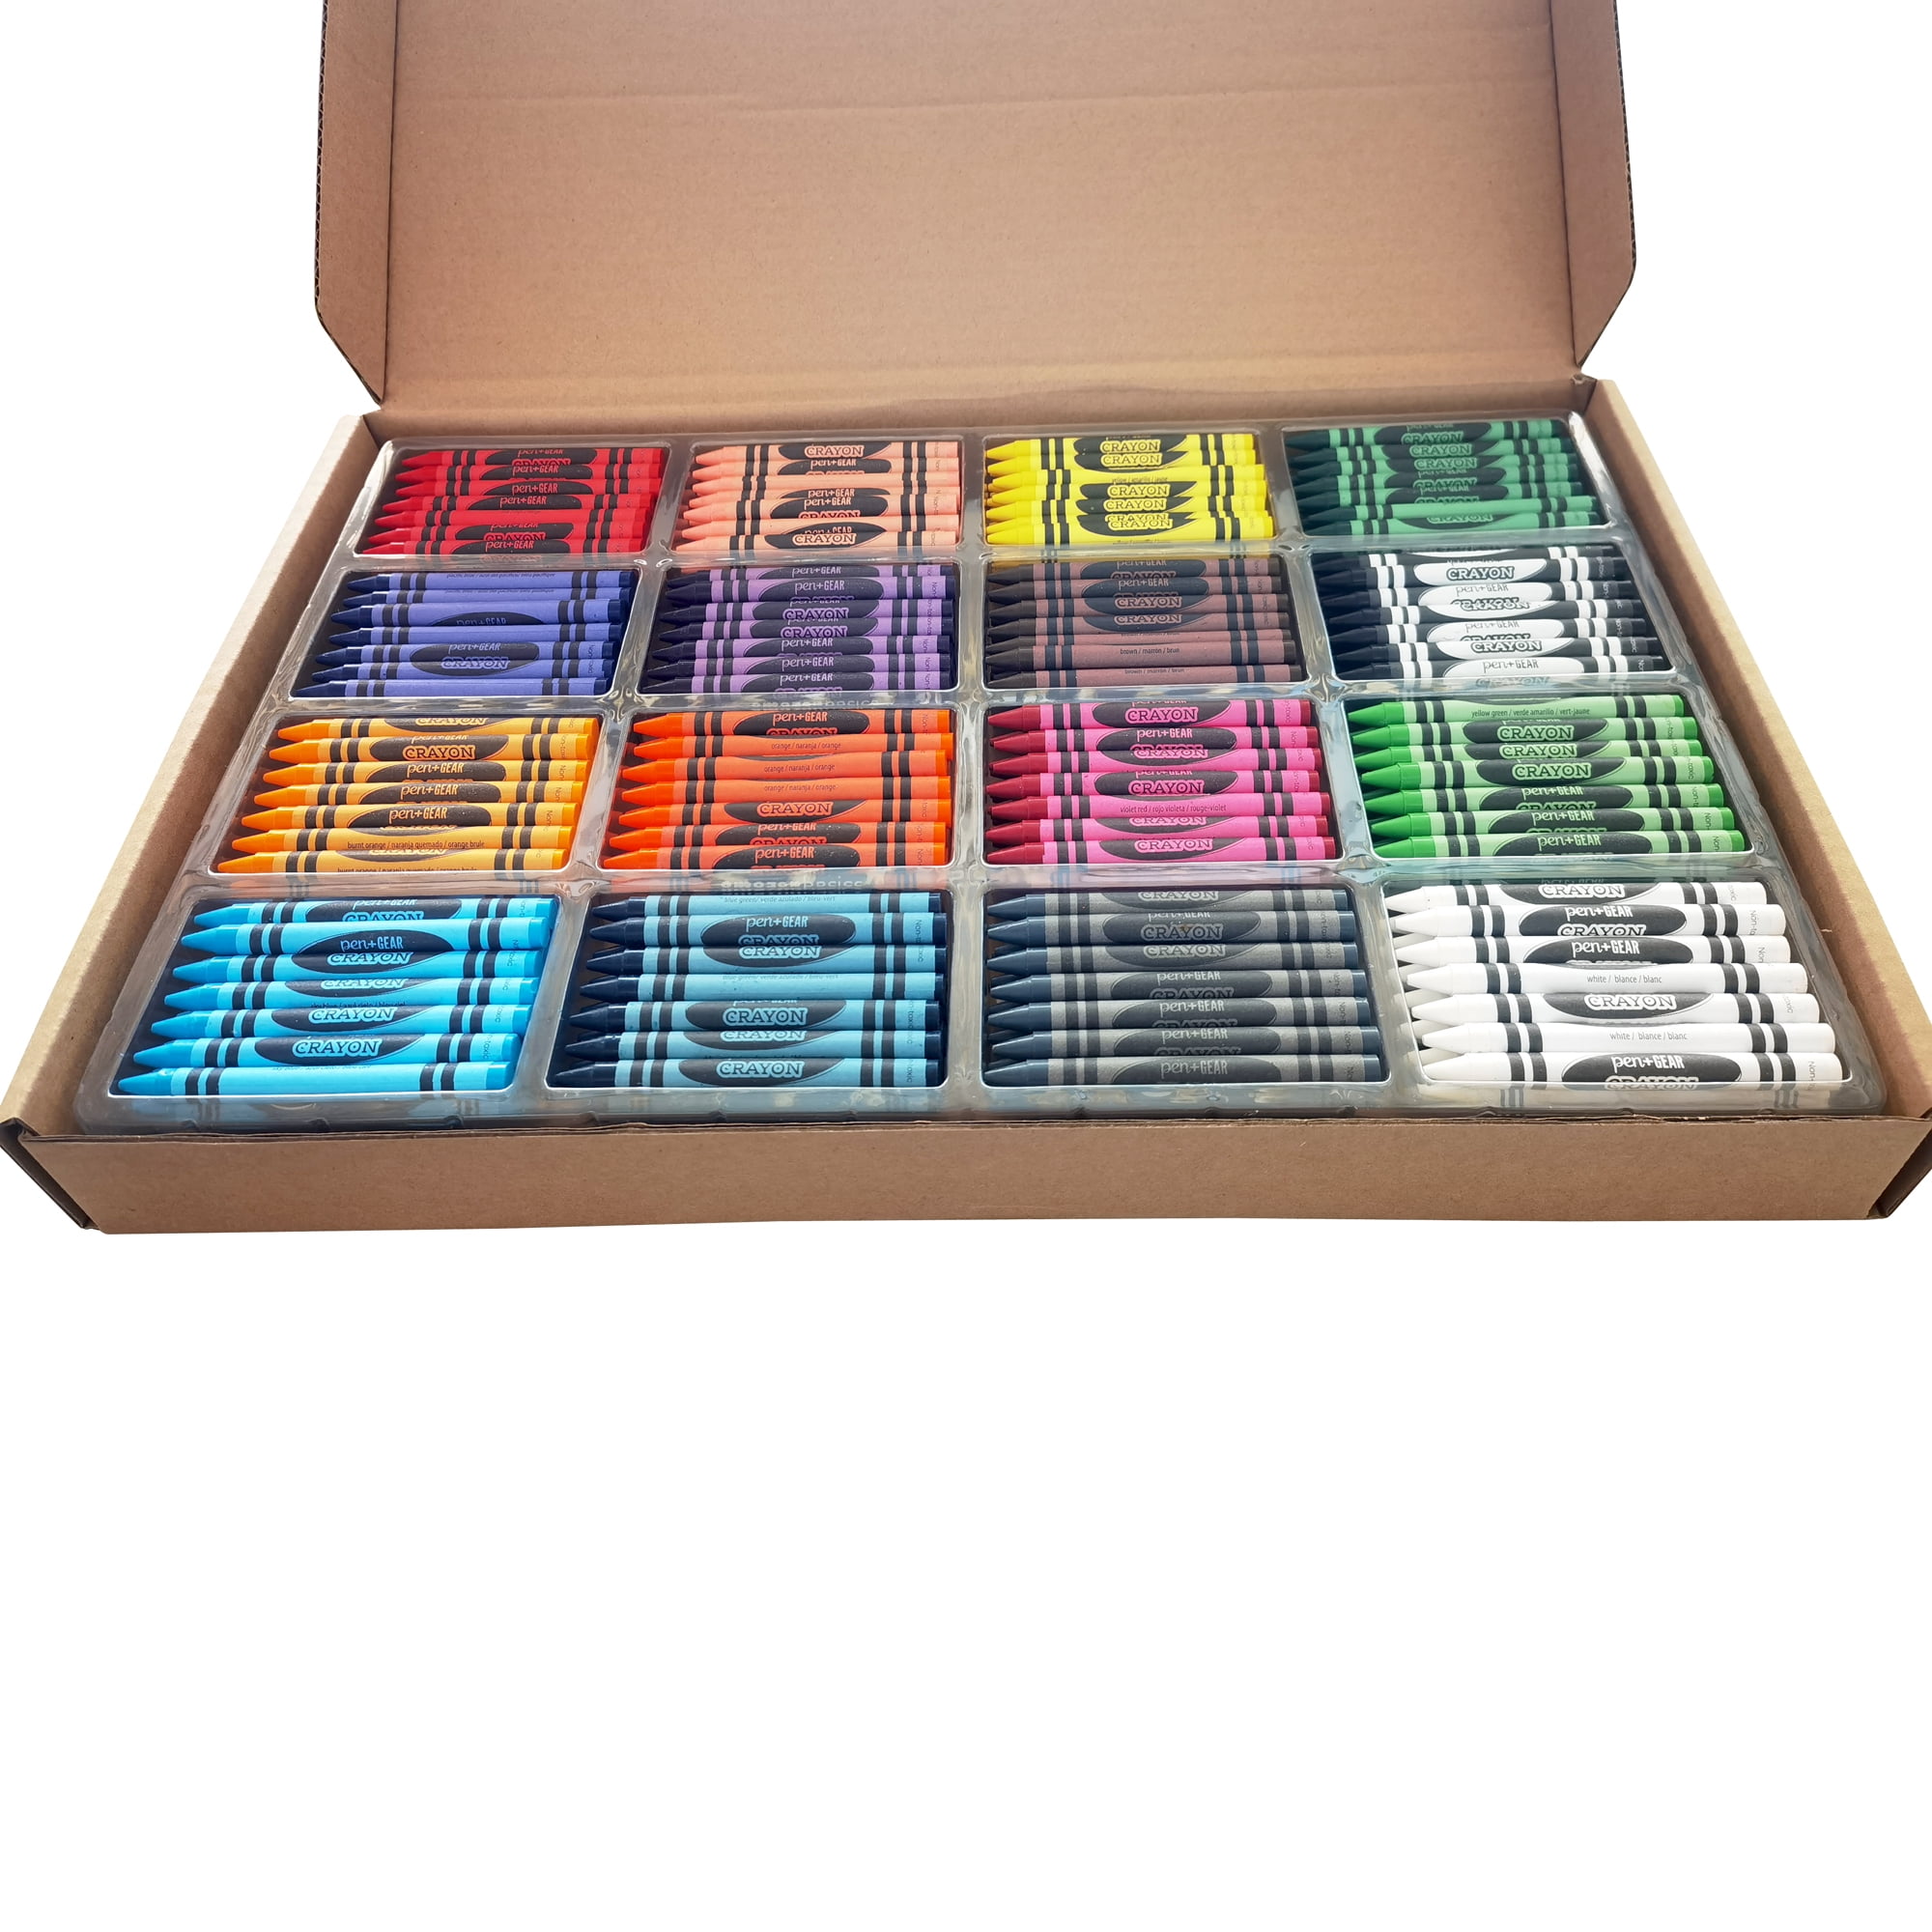 Pen + Gear Classic Crayons, 400 Count in Class Pack, 16 Assorted Colors, Size: Dimater 0.315 inch Length 3.54 inch, 36122484